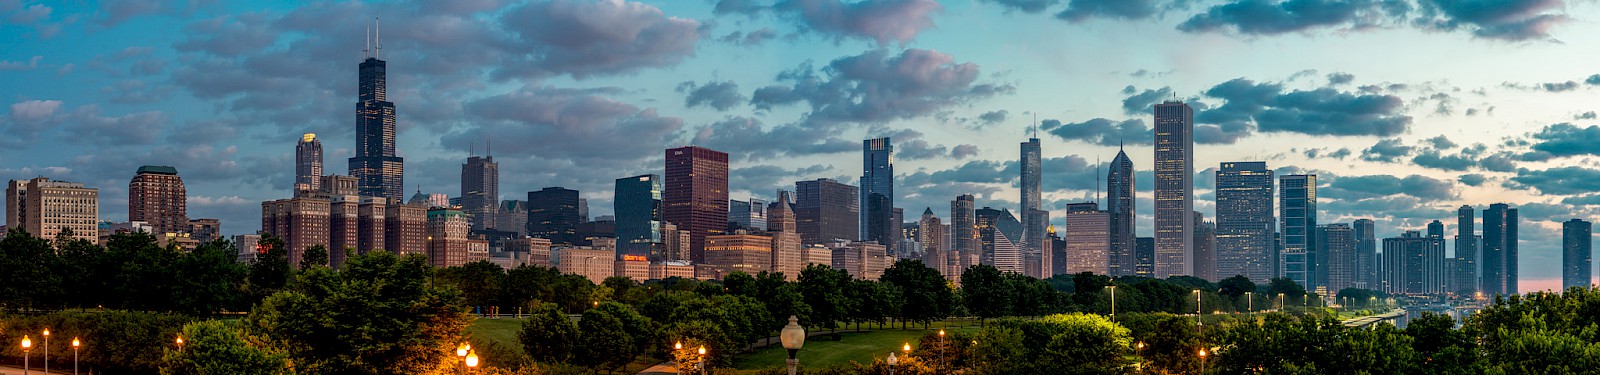 Chicago at dawn, by William Prost at [Flickr](https://flic.kr/p/ooSa2f)